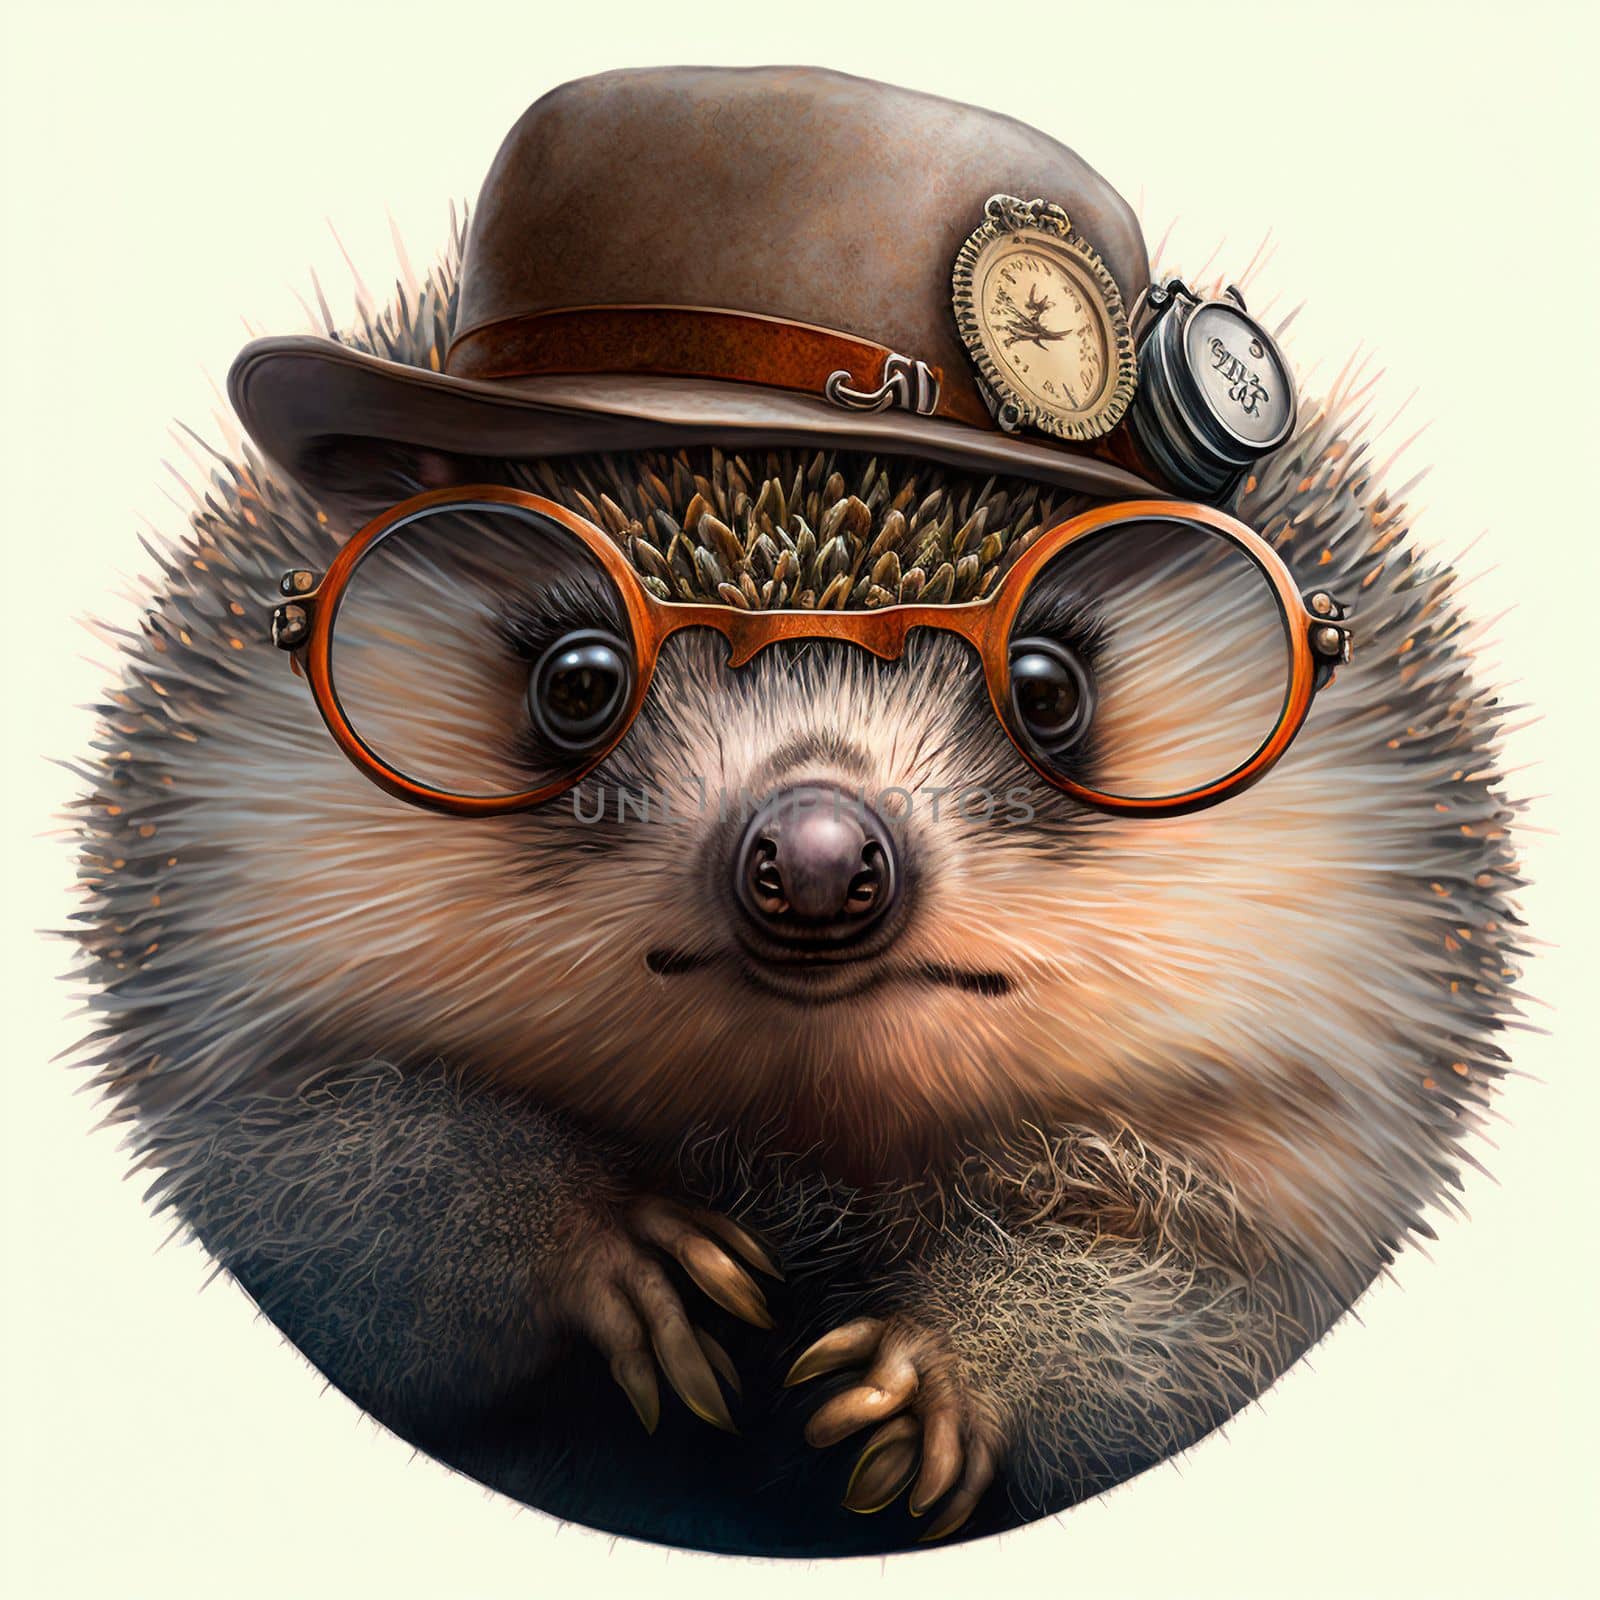 Hedgehog with glasses and a steampunk hat. High quality illustration